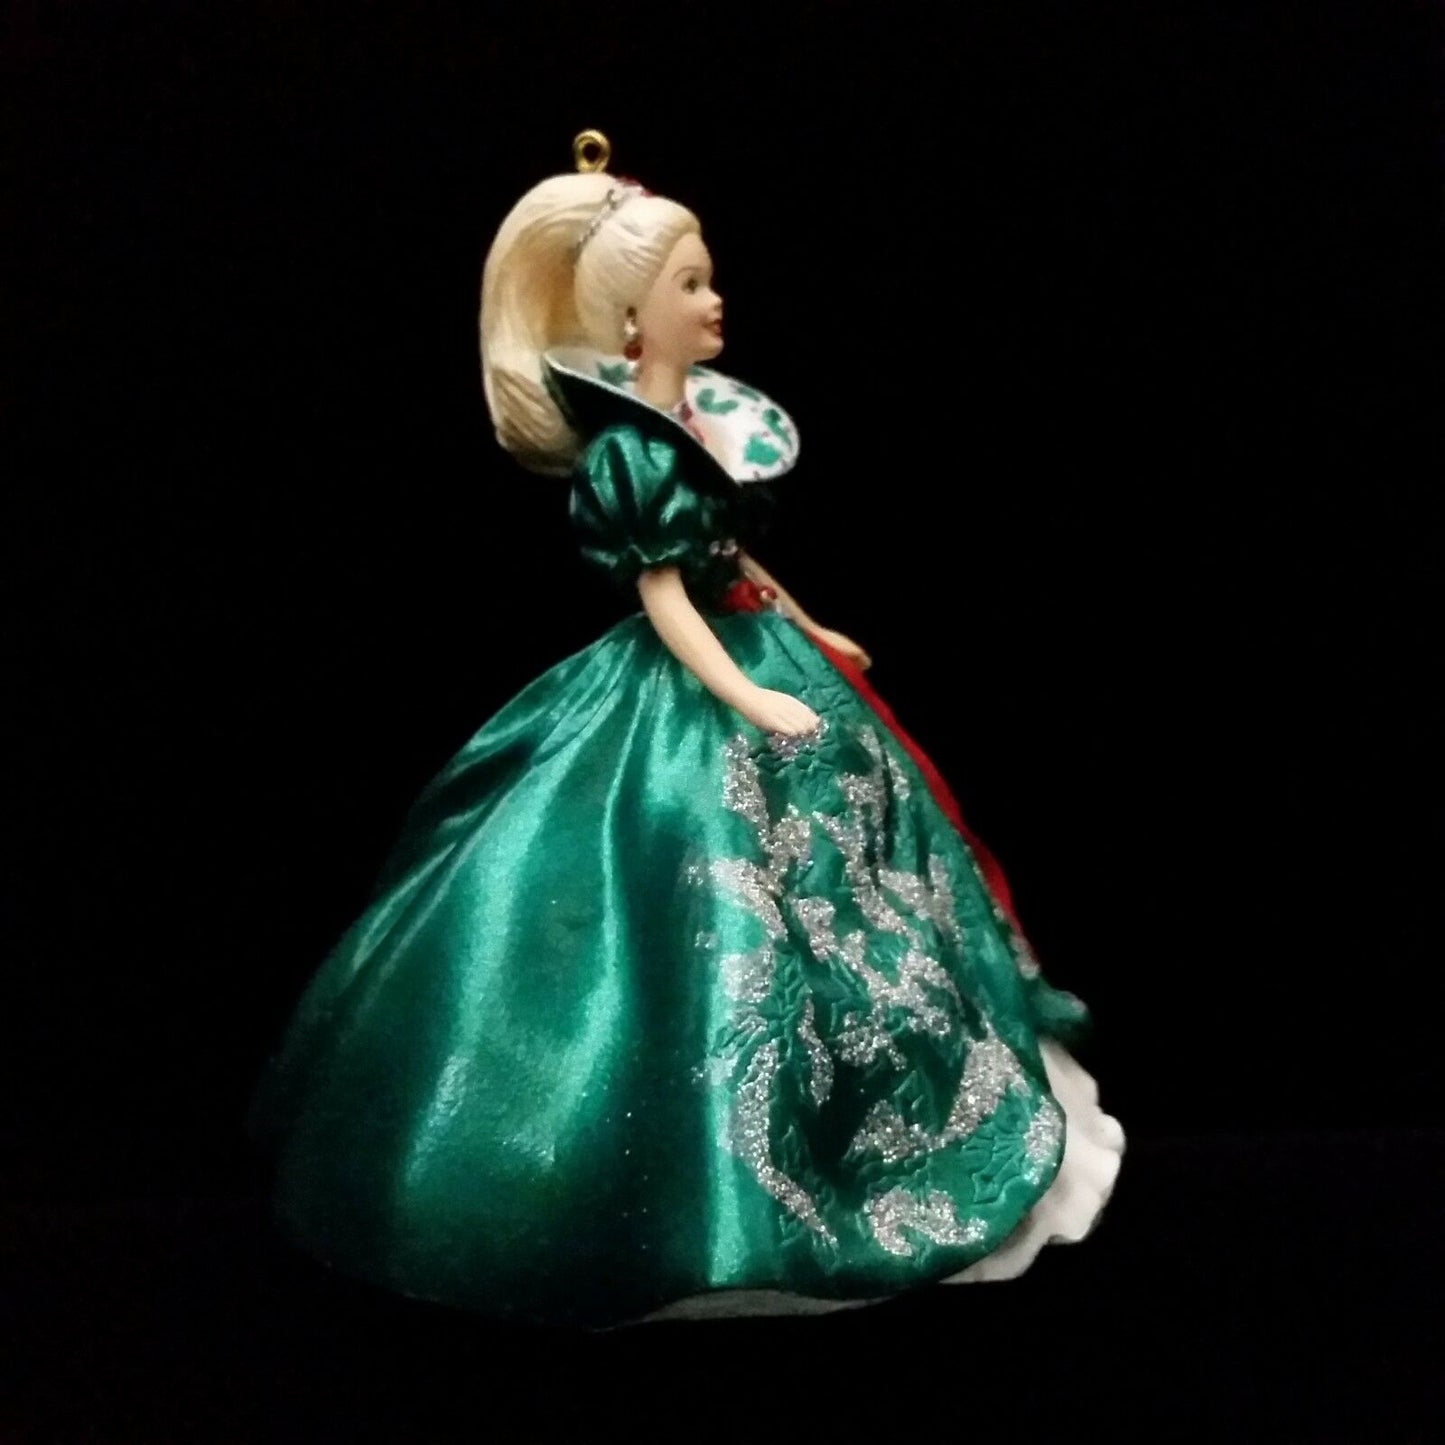 Vintage Holiday Barbie Hallmark Ornament 1995 Green Dress and Blonde Hair Christmas Collector's Series - At Grandma's Table